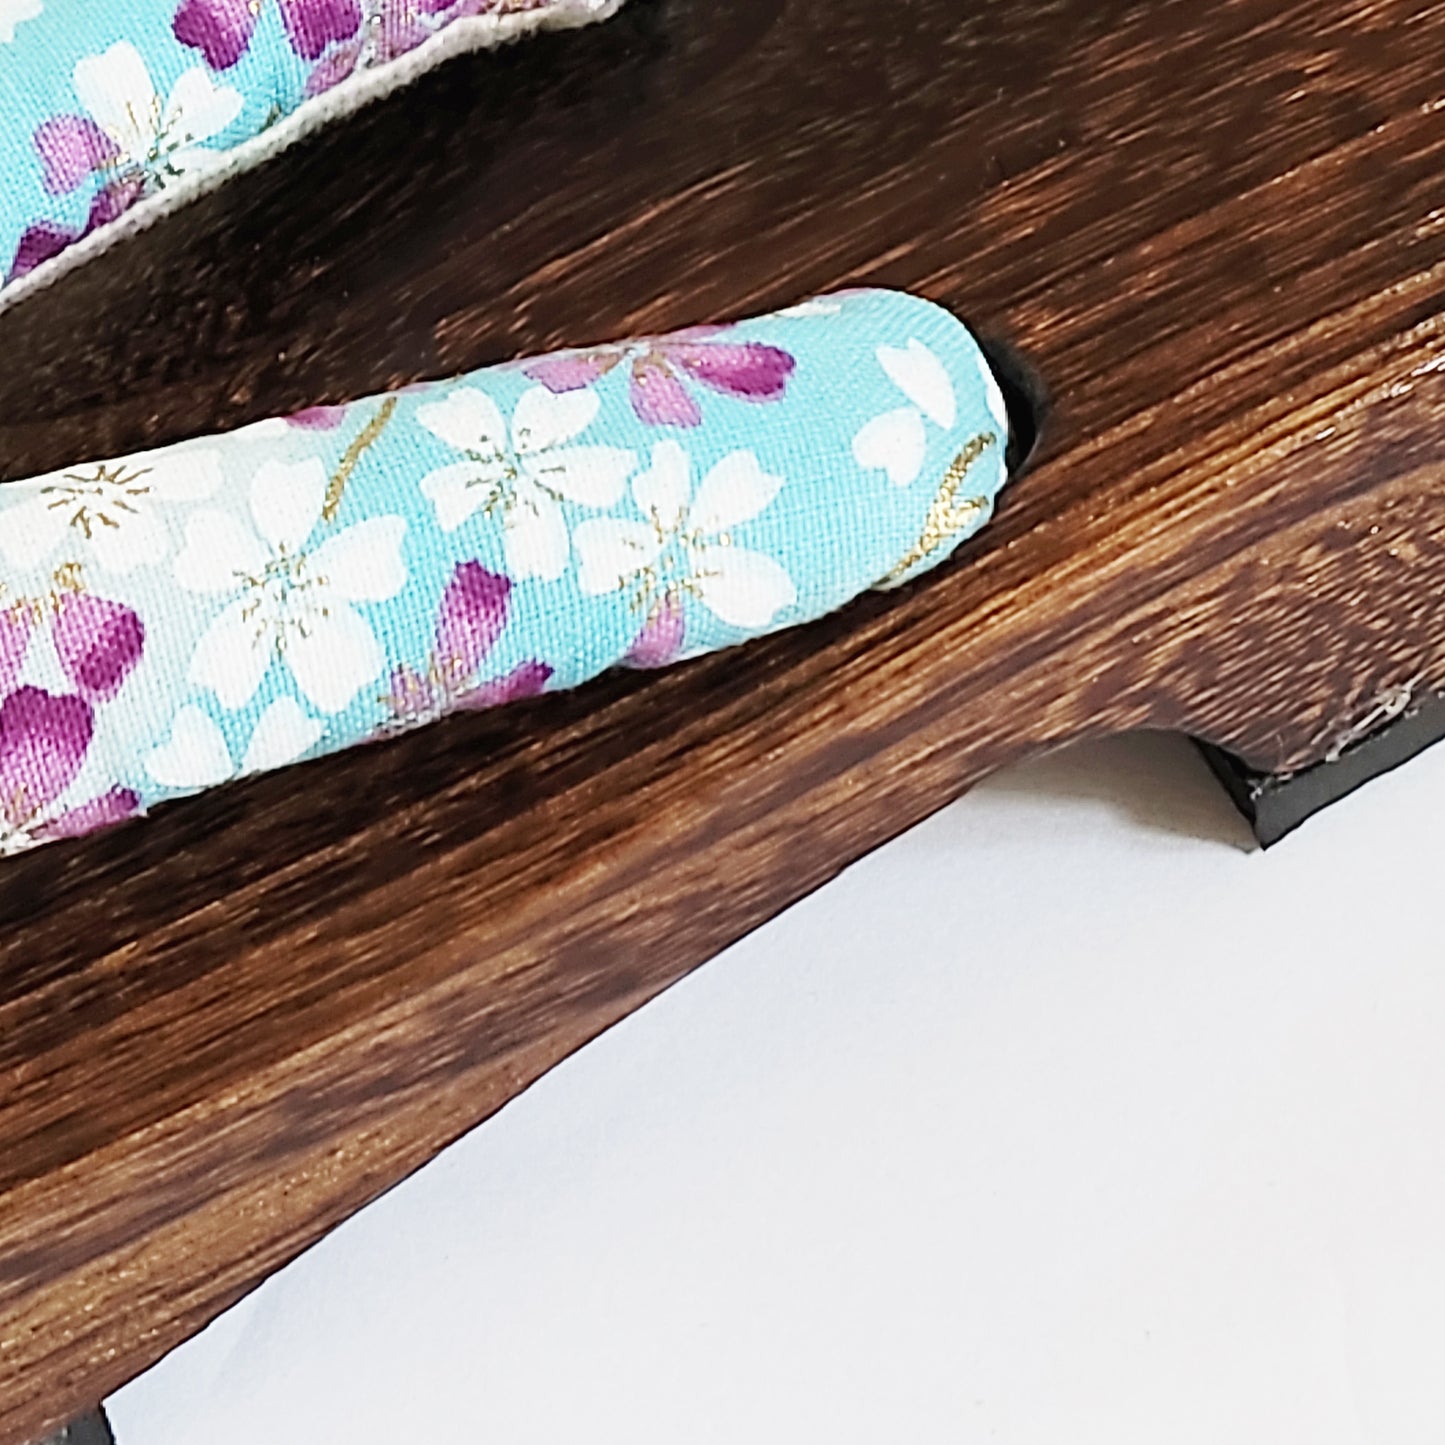 Geta Sandals for Women - Purple and White Cherry Blossoms in Blue